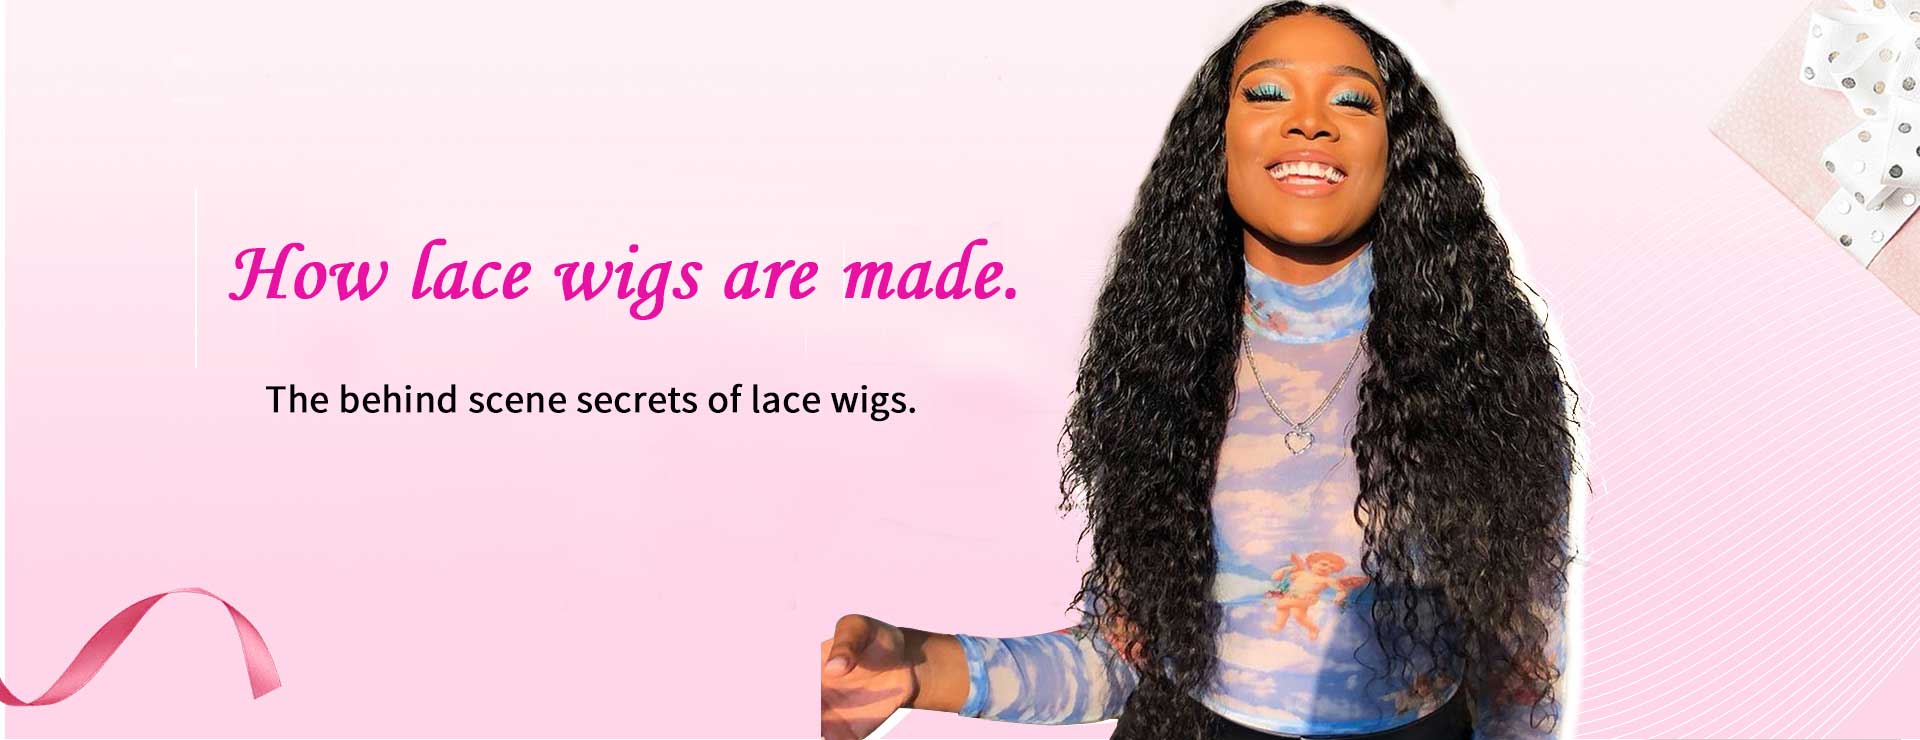 how lace wigs are made